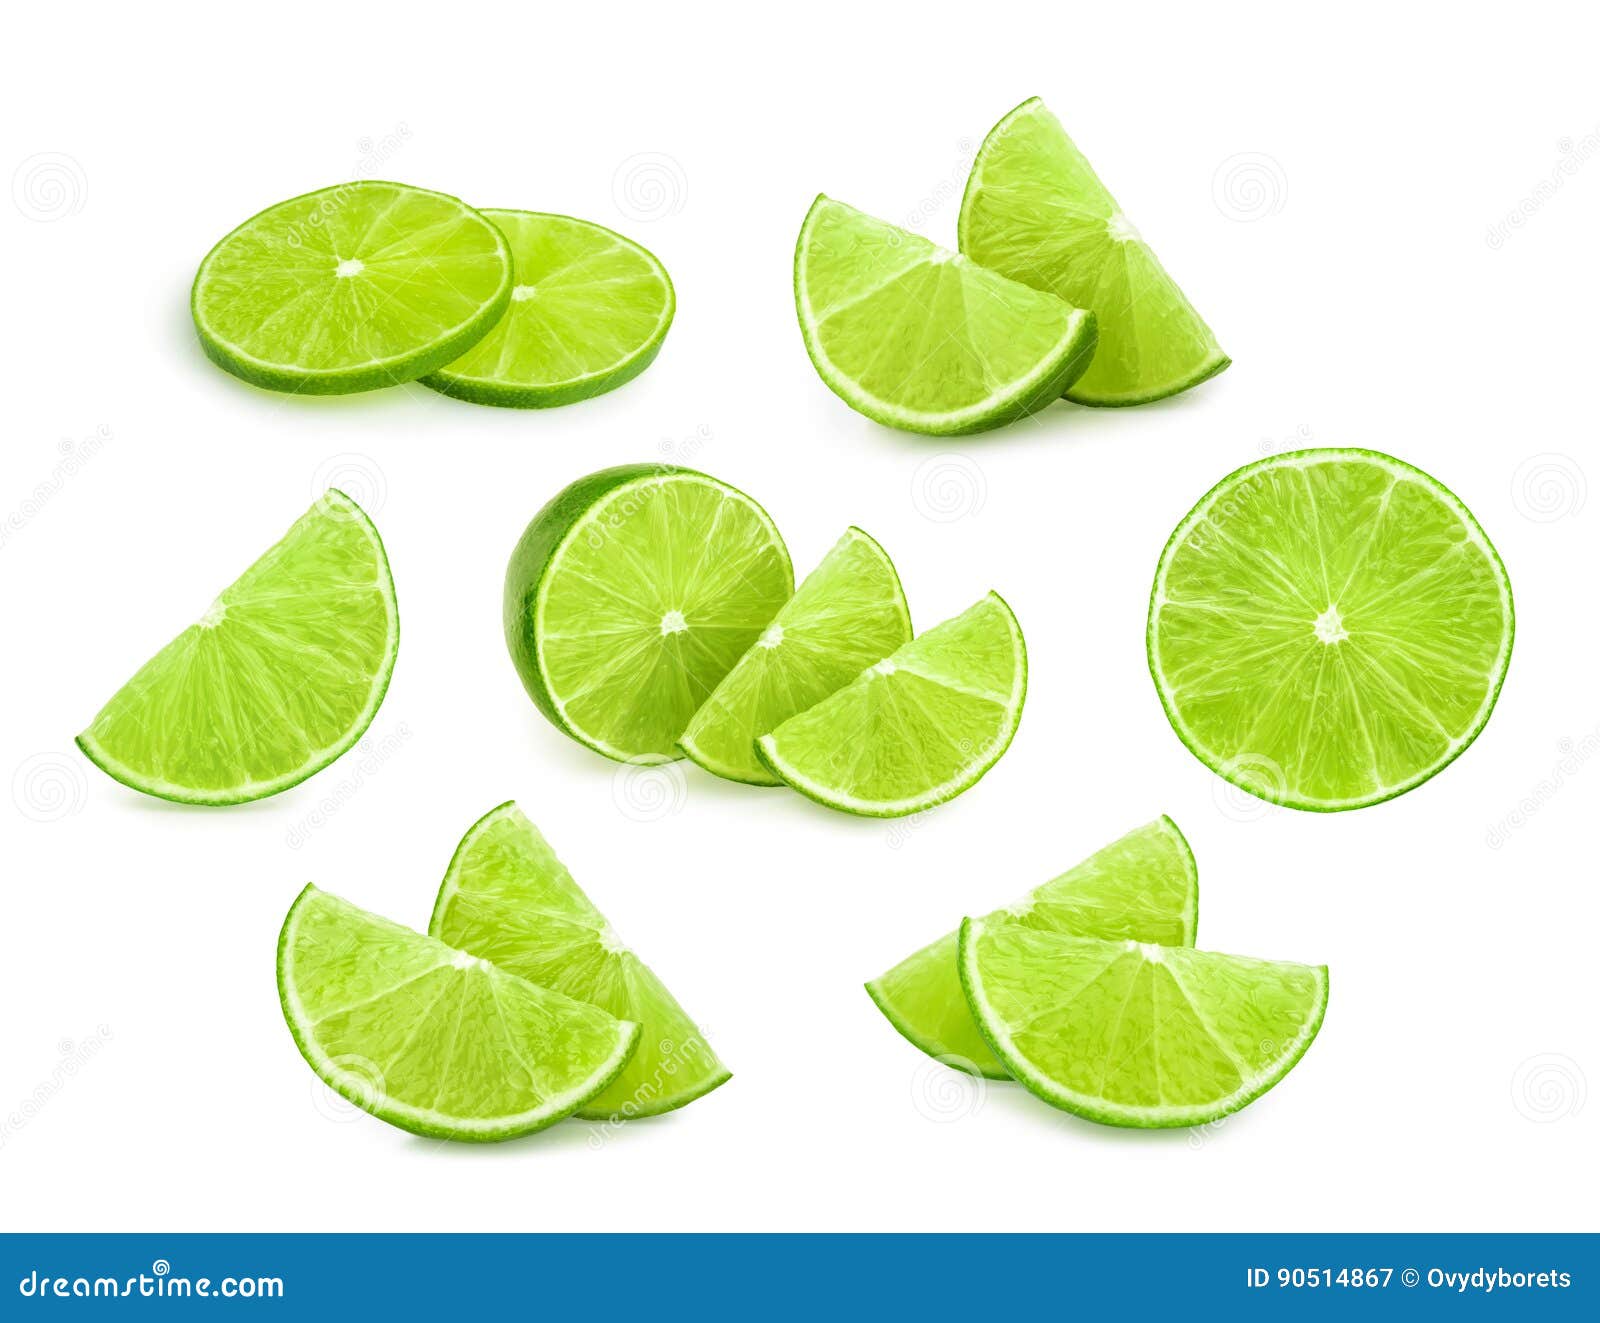 lime slices 